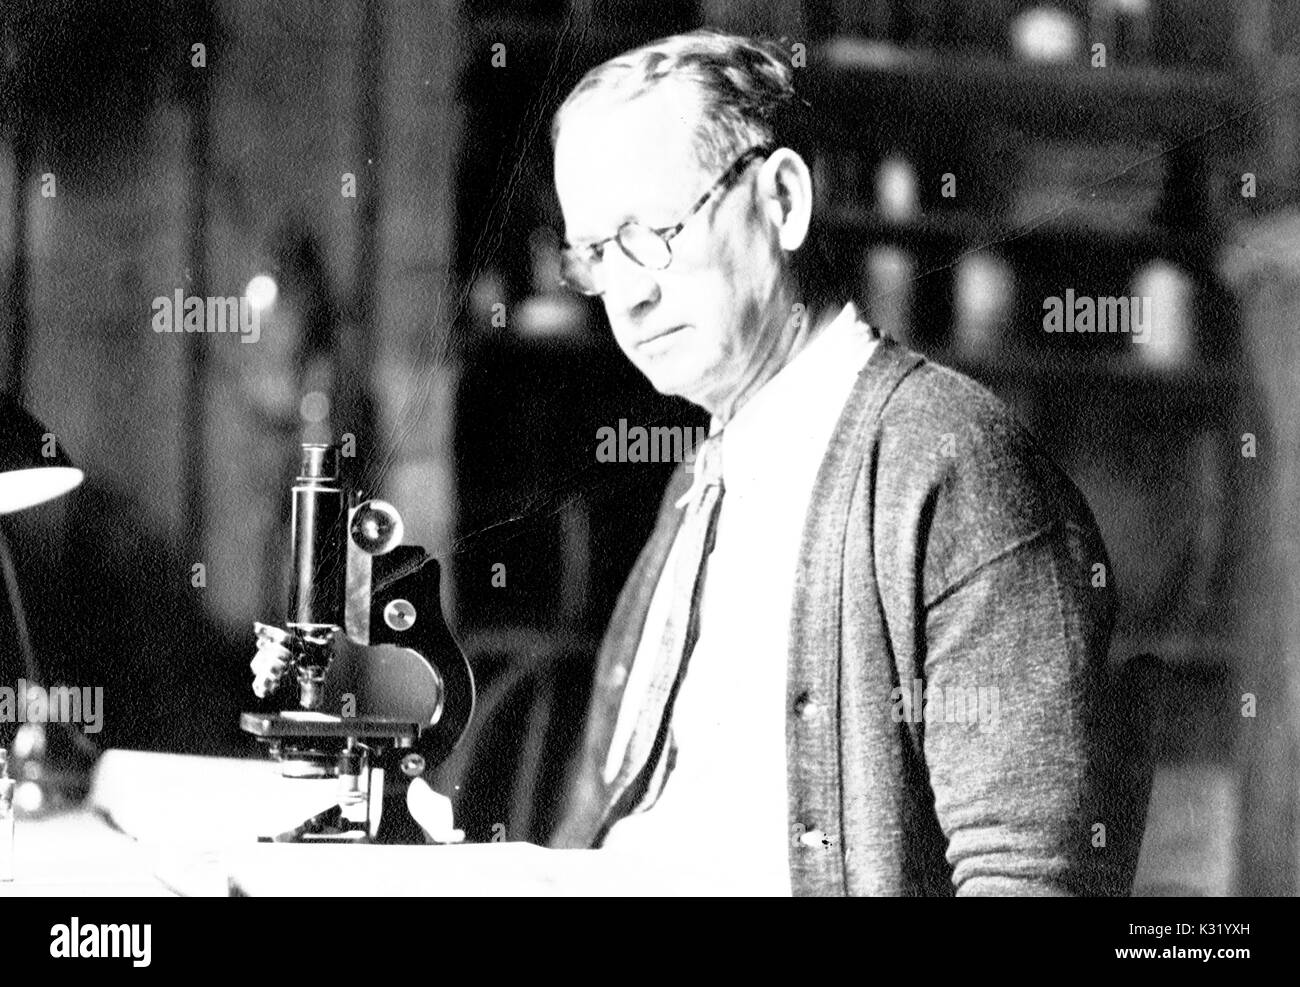 Sepia candid photograph of Robert Erwin Coker, zoologist and fellow and professor of biology at Johns Hopkins University, standing at a laboratory bench with microscope, wearing glasses, tie, and cardigan, Baltimore, Maryland, 1929. Stock Photo